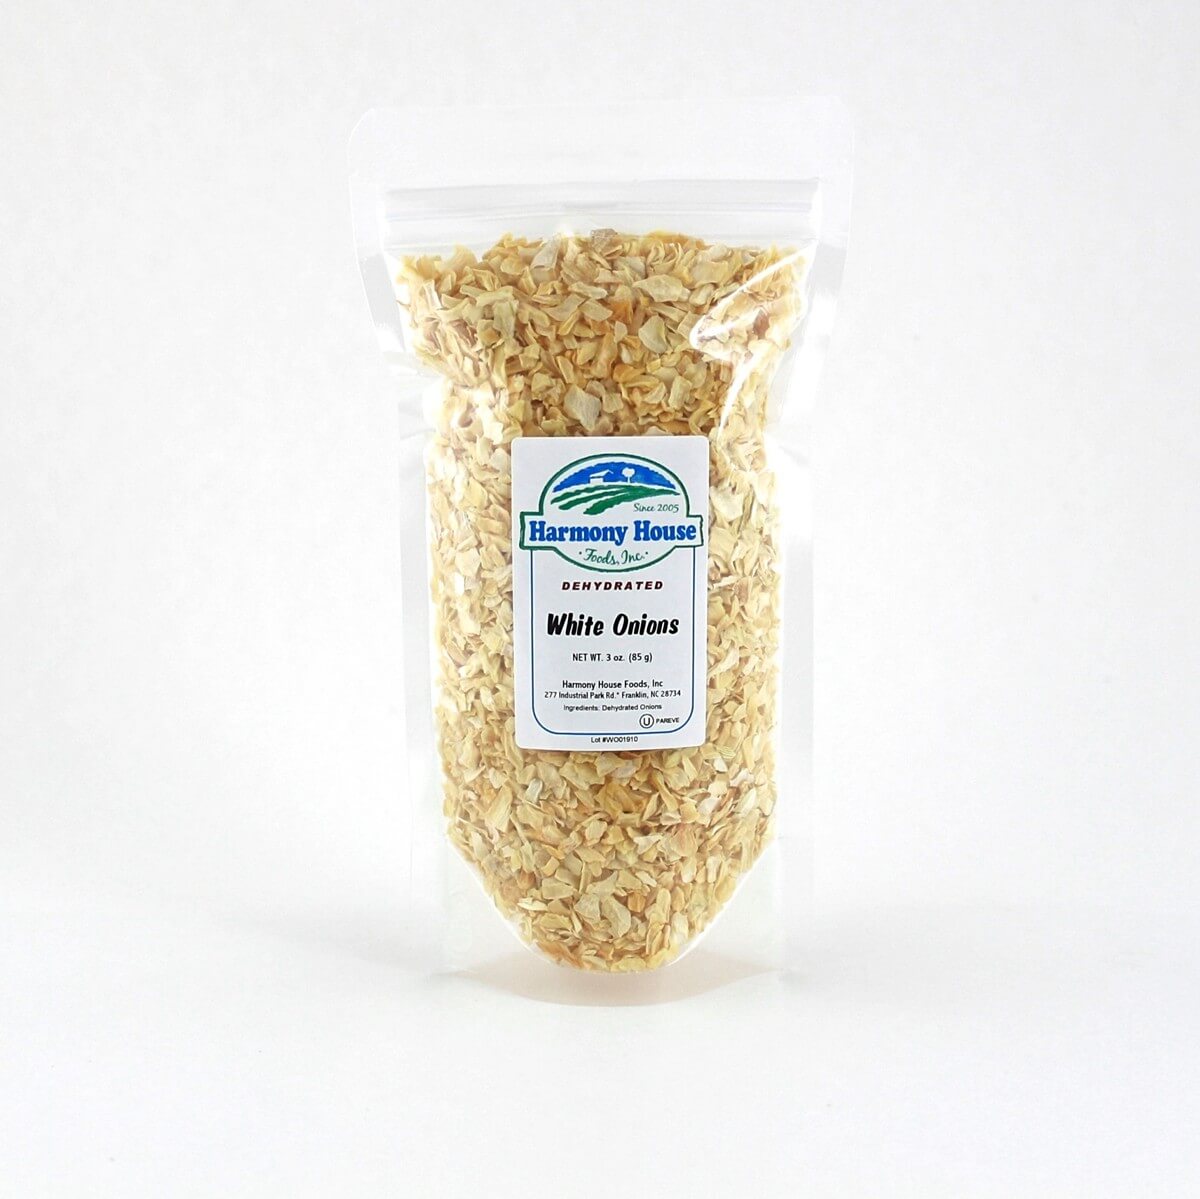 A bag of granola on a white background.